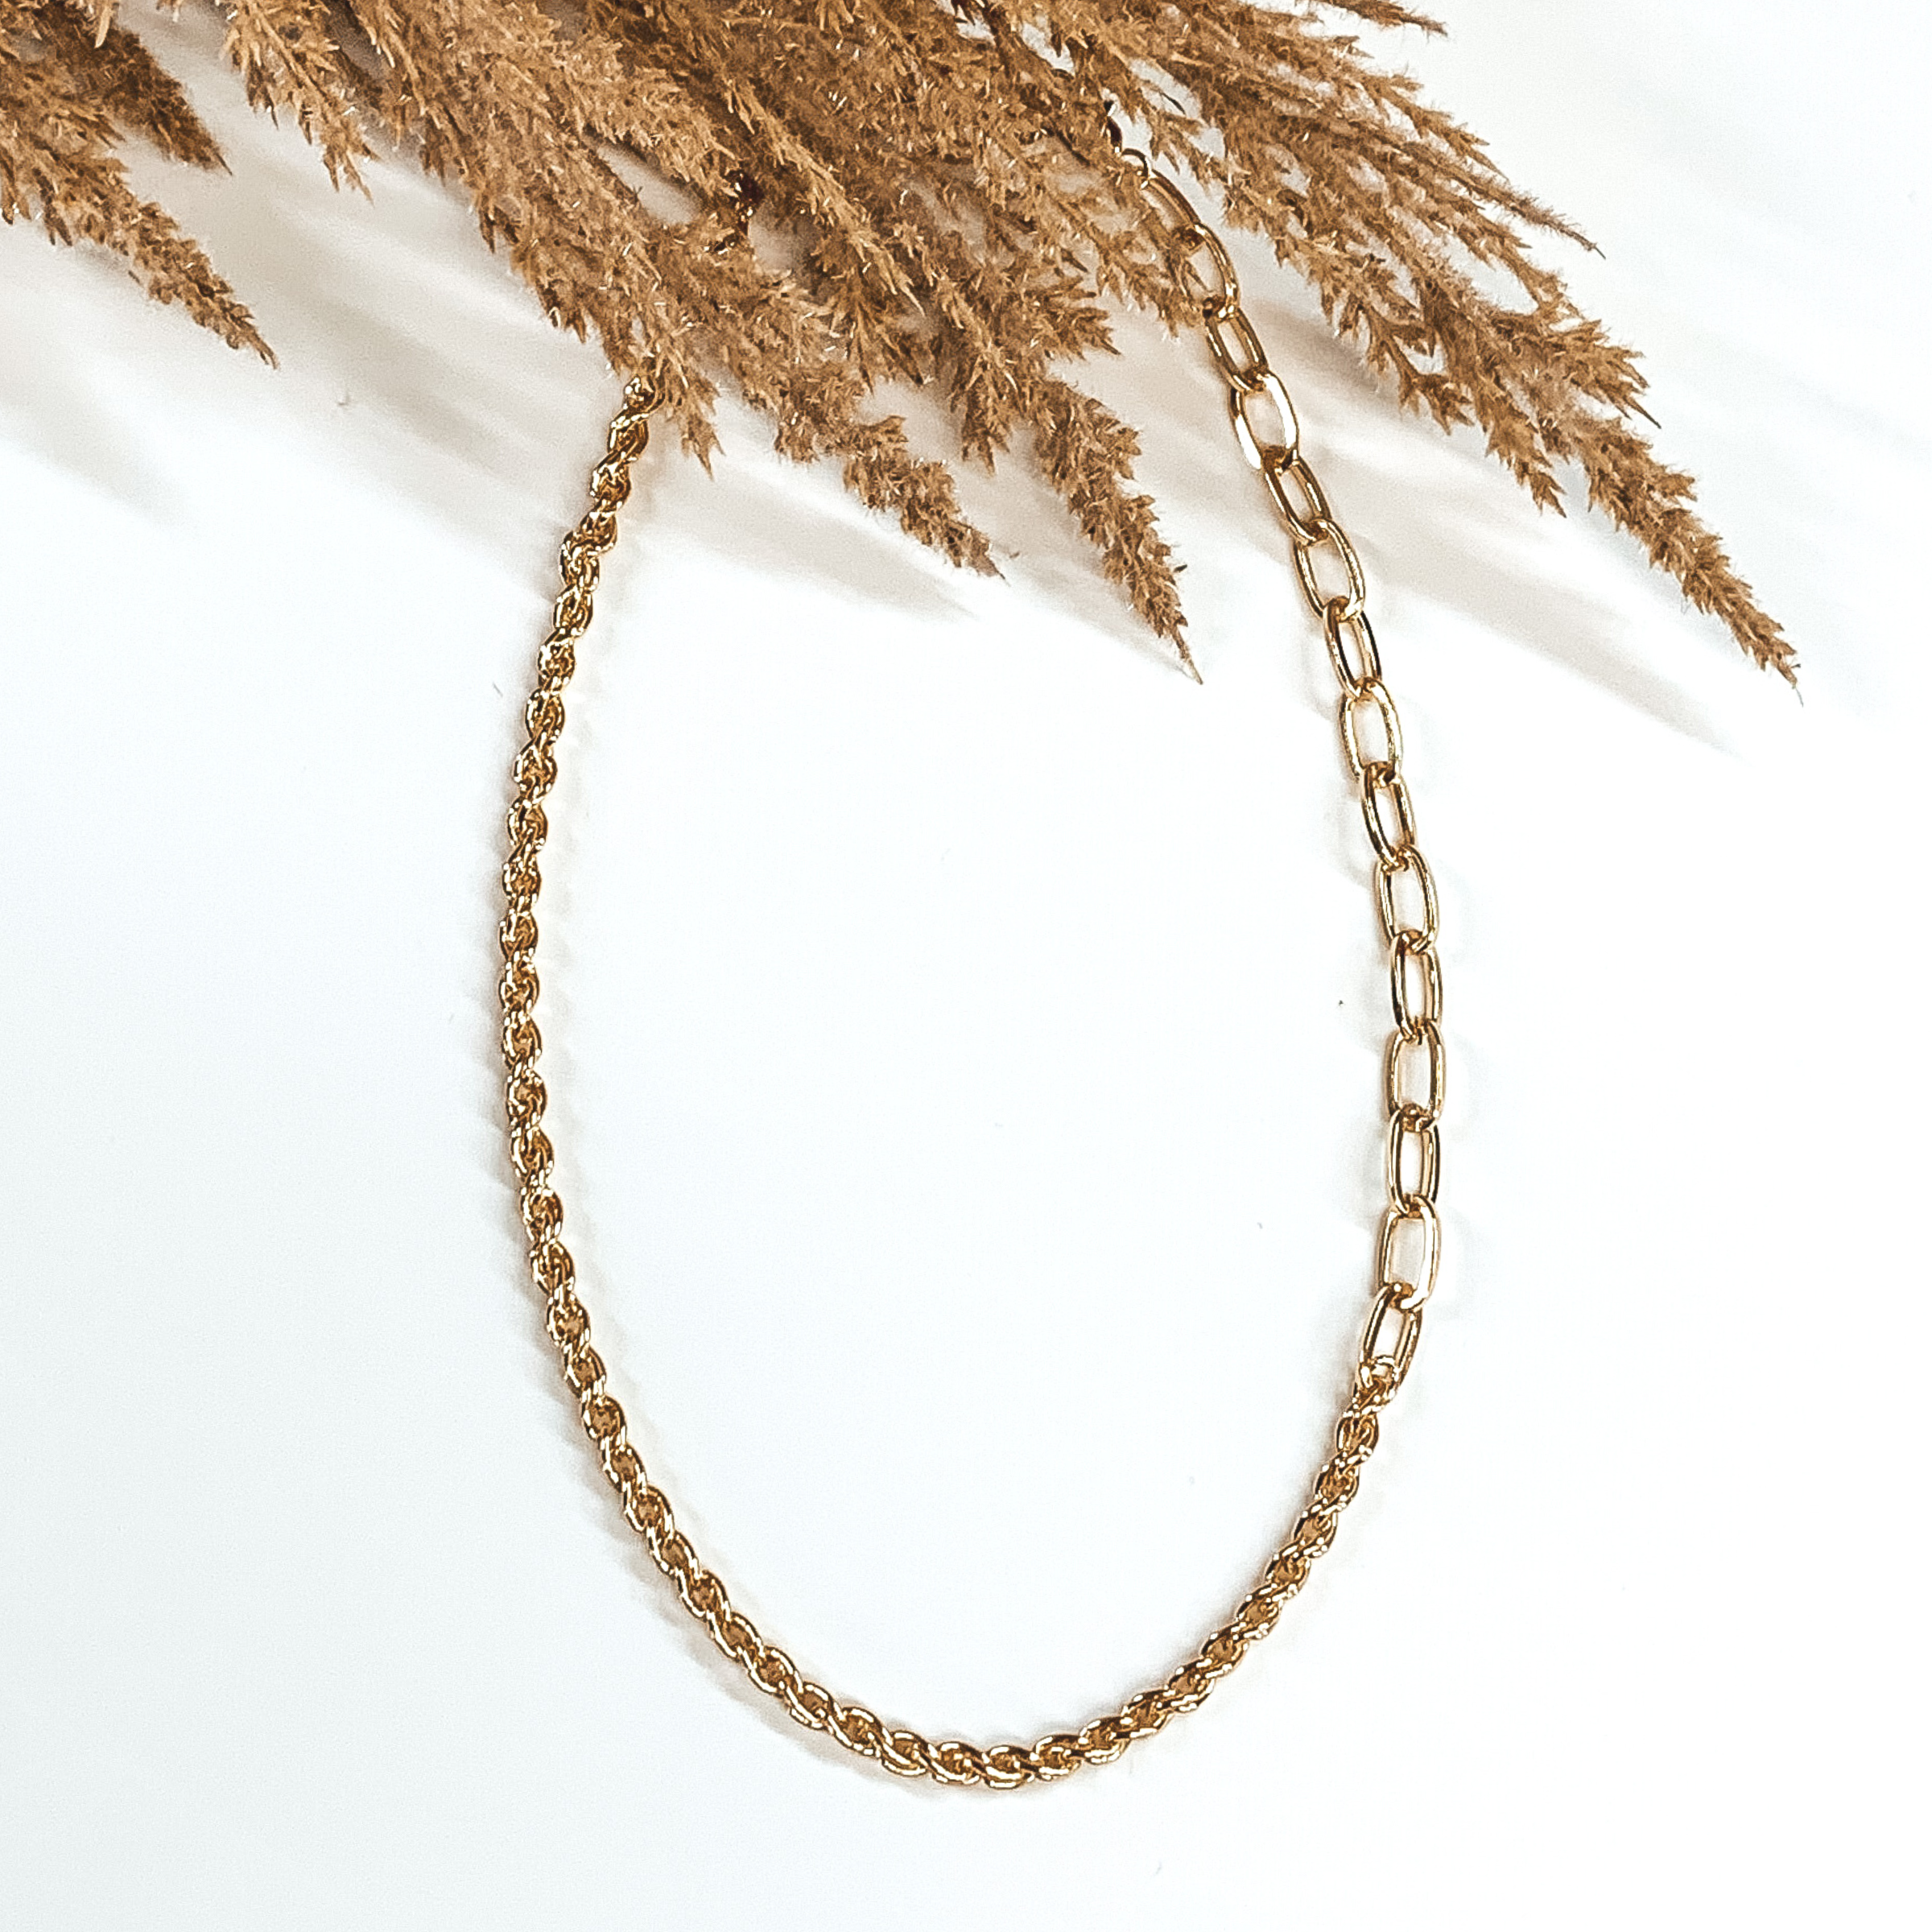 A single gold chained necklace. This necklace includes two different types of chains on the same strand. This necklace is pictured on a white background with tan floral at the top.